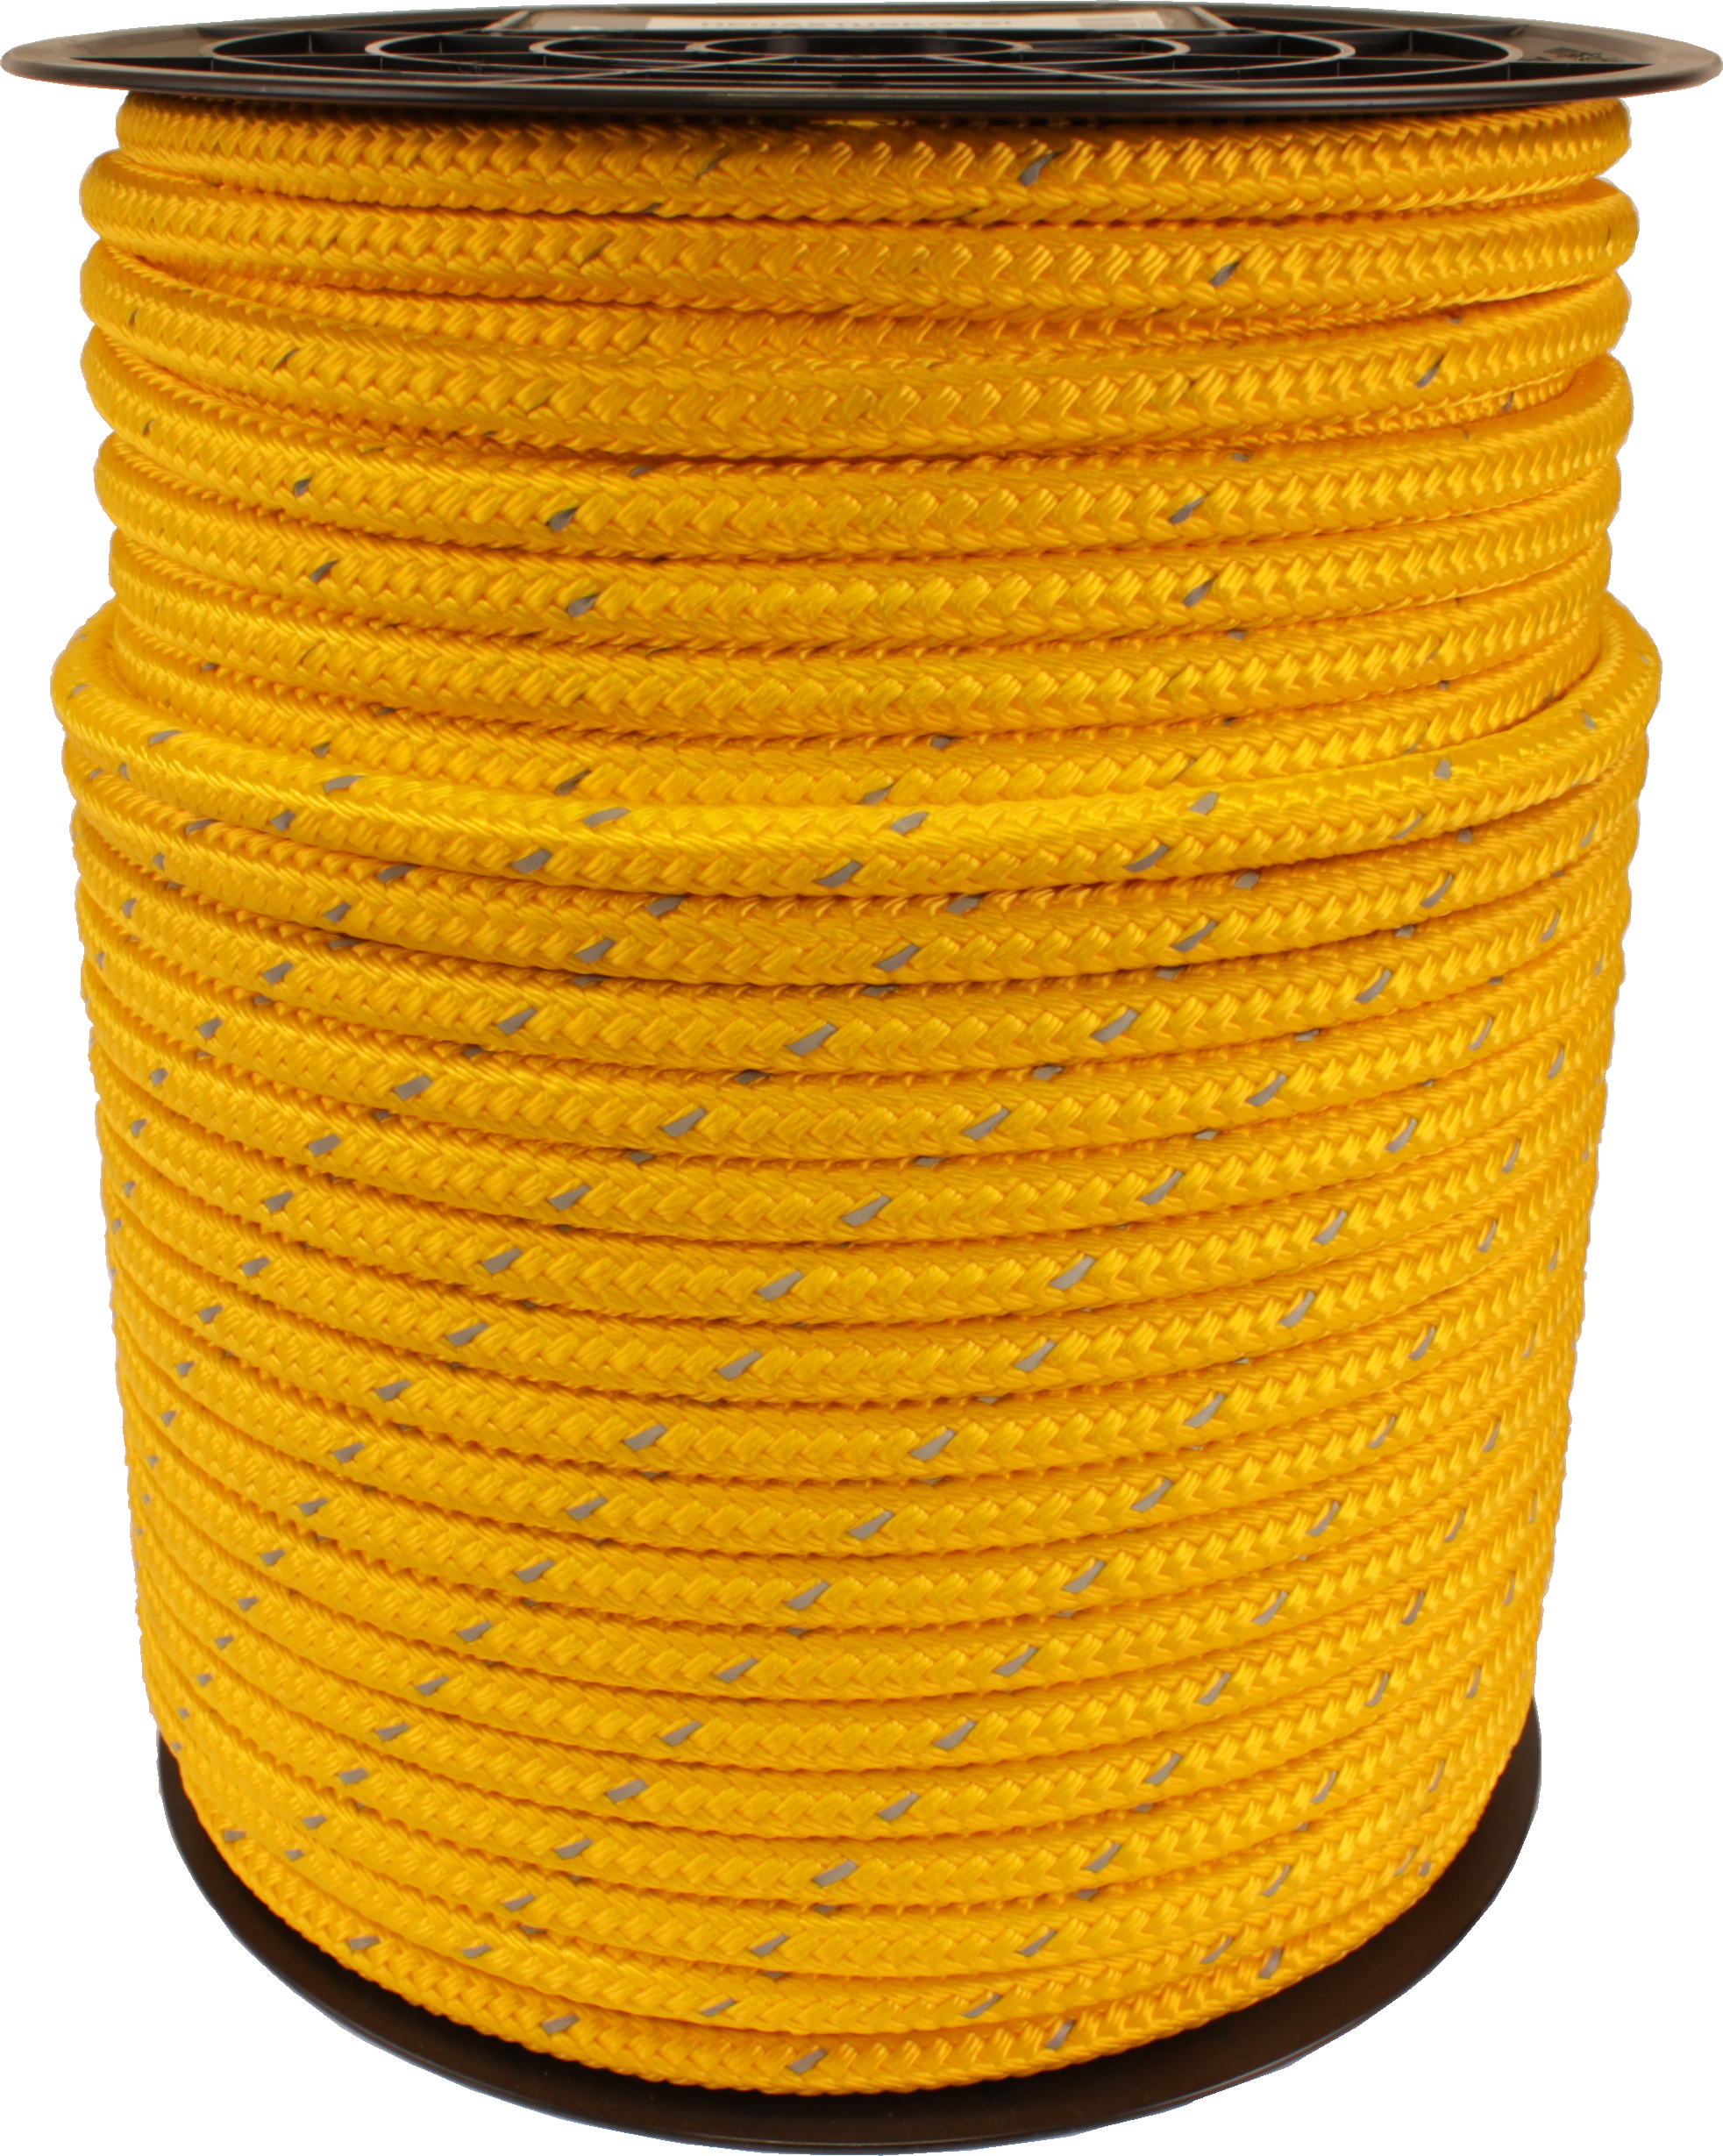 Reflective rope, PP-multifilament, many diameters - PiippoShop